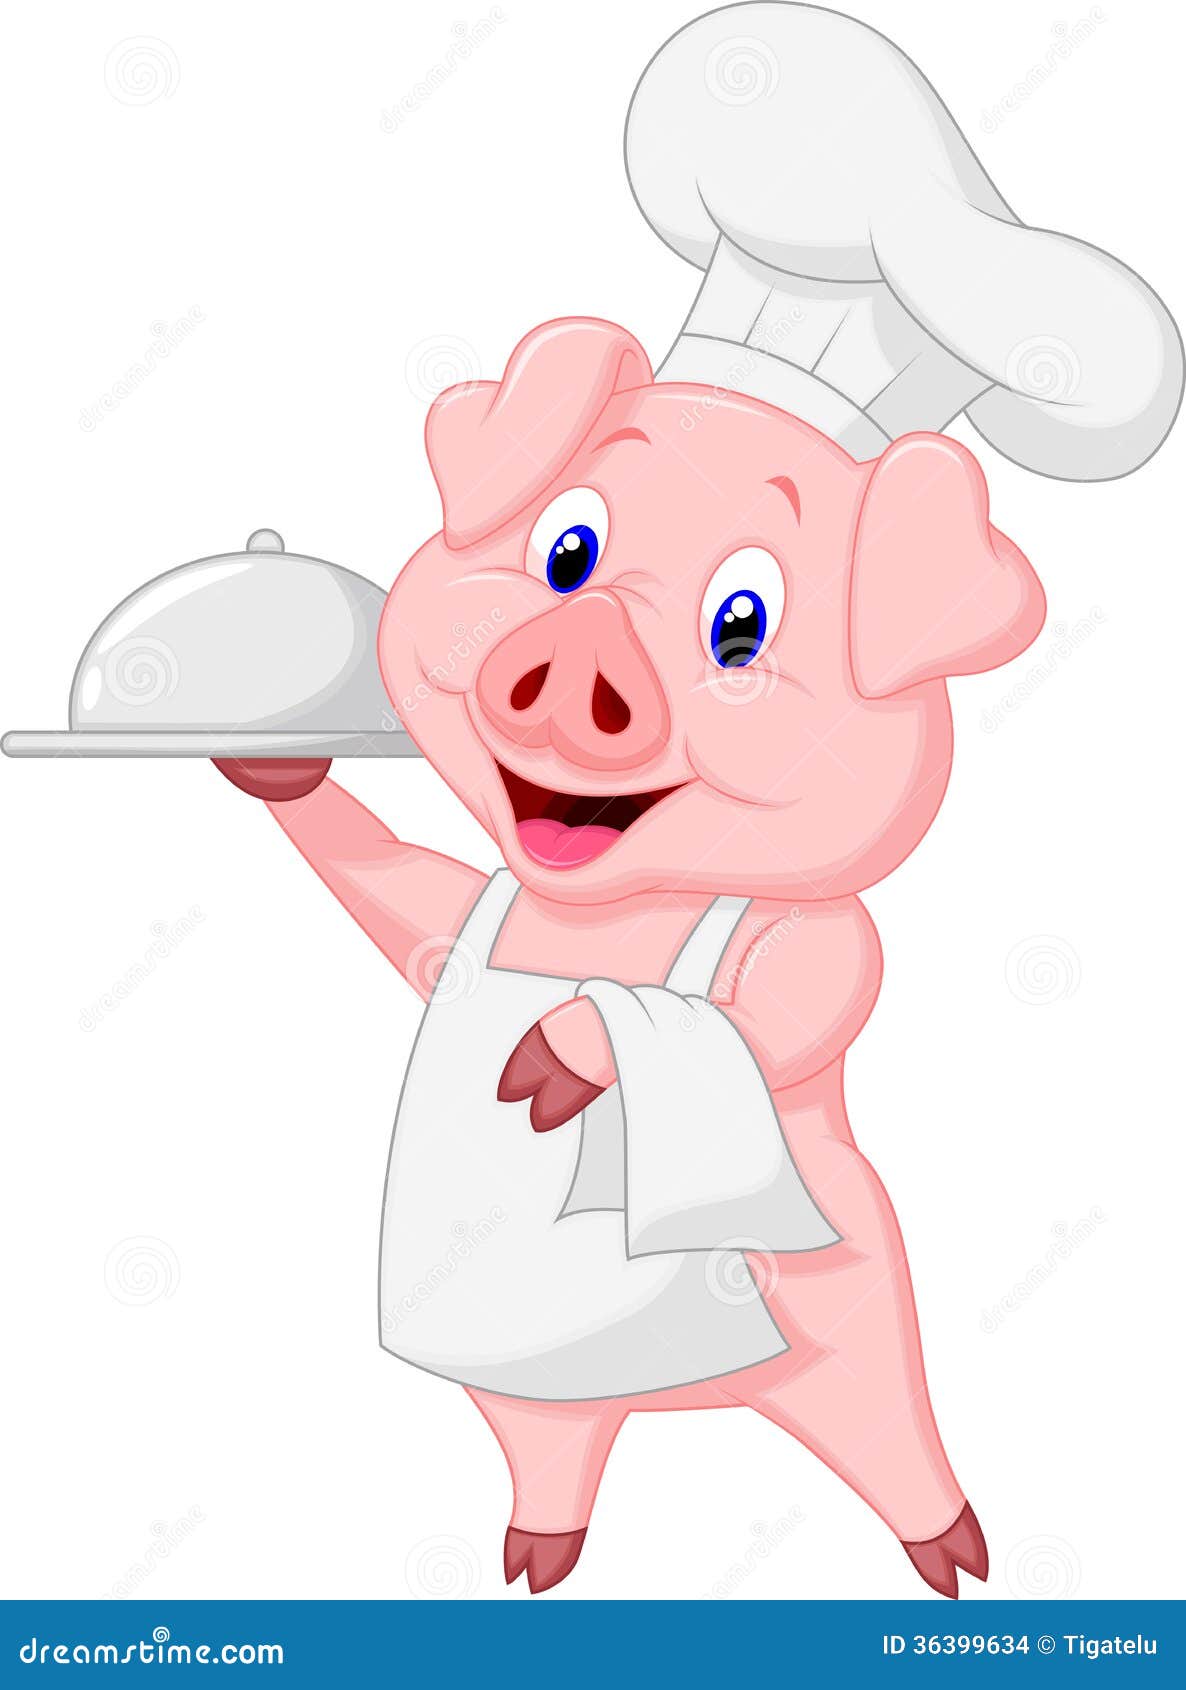 clipart pig cooking - photo #47